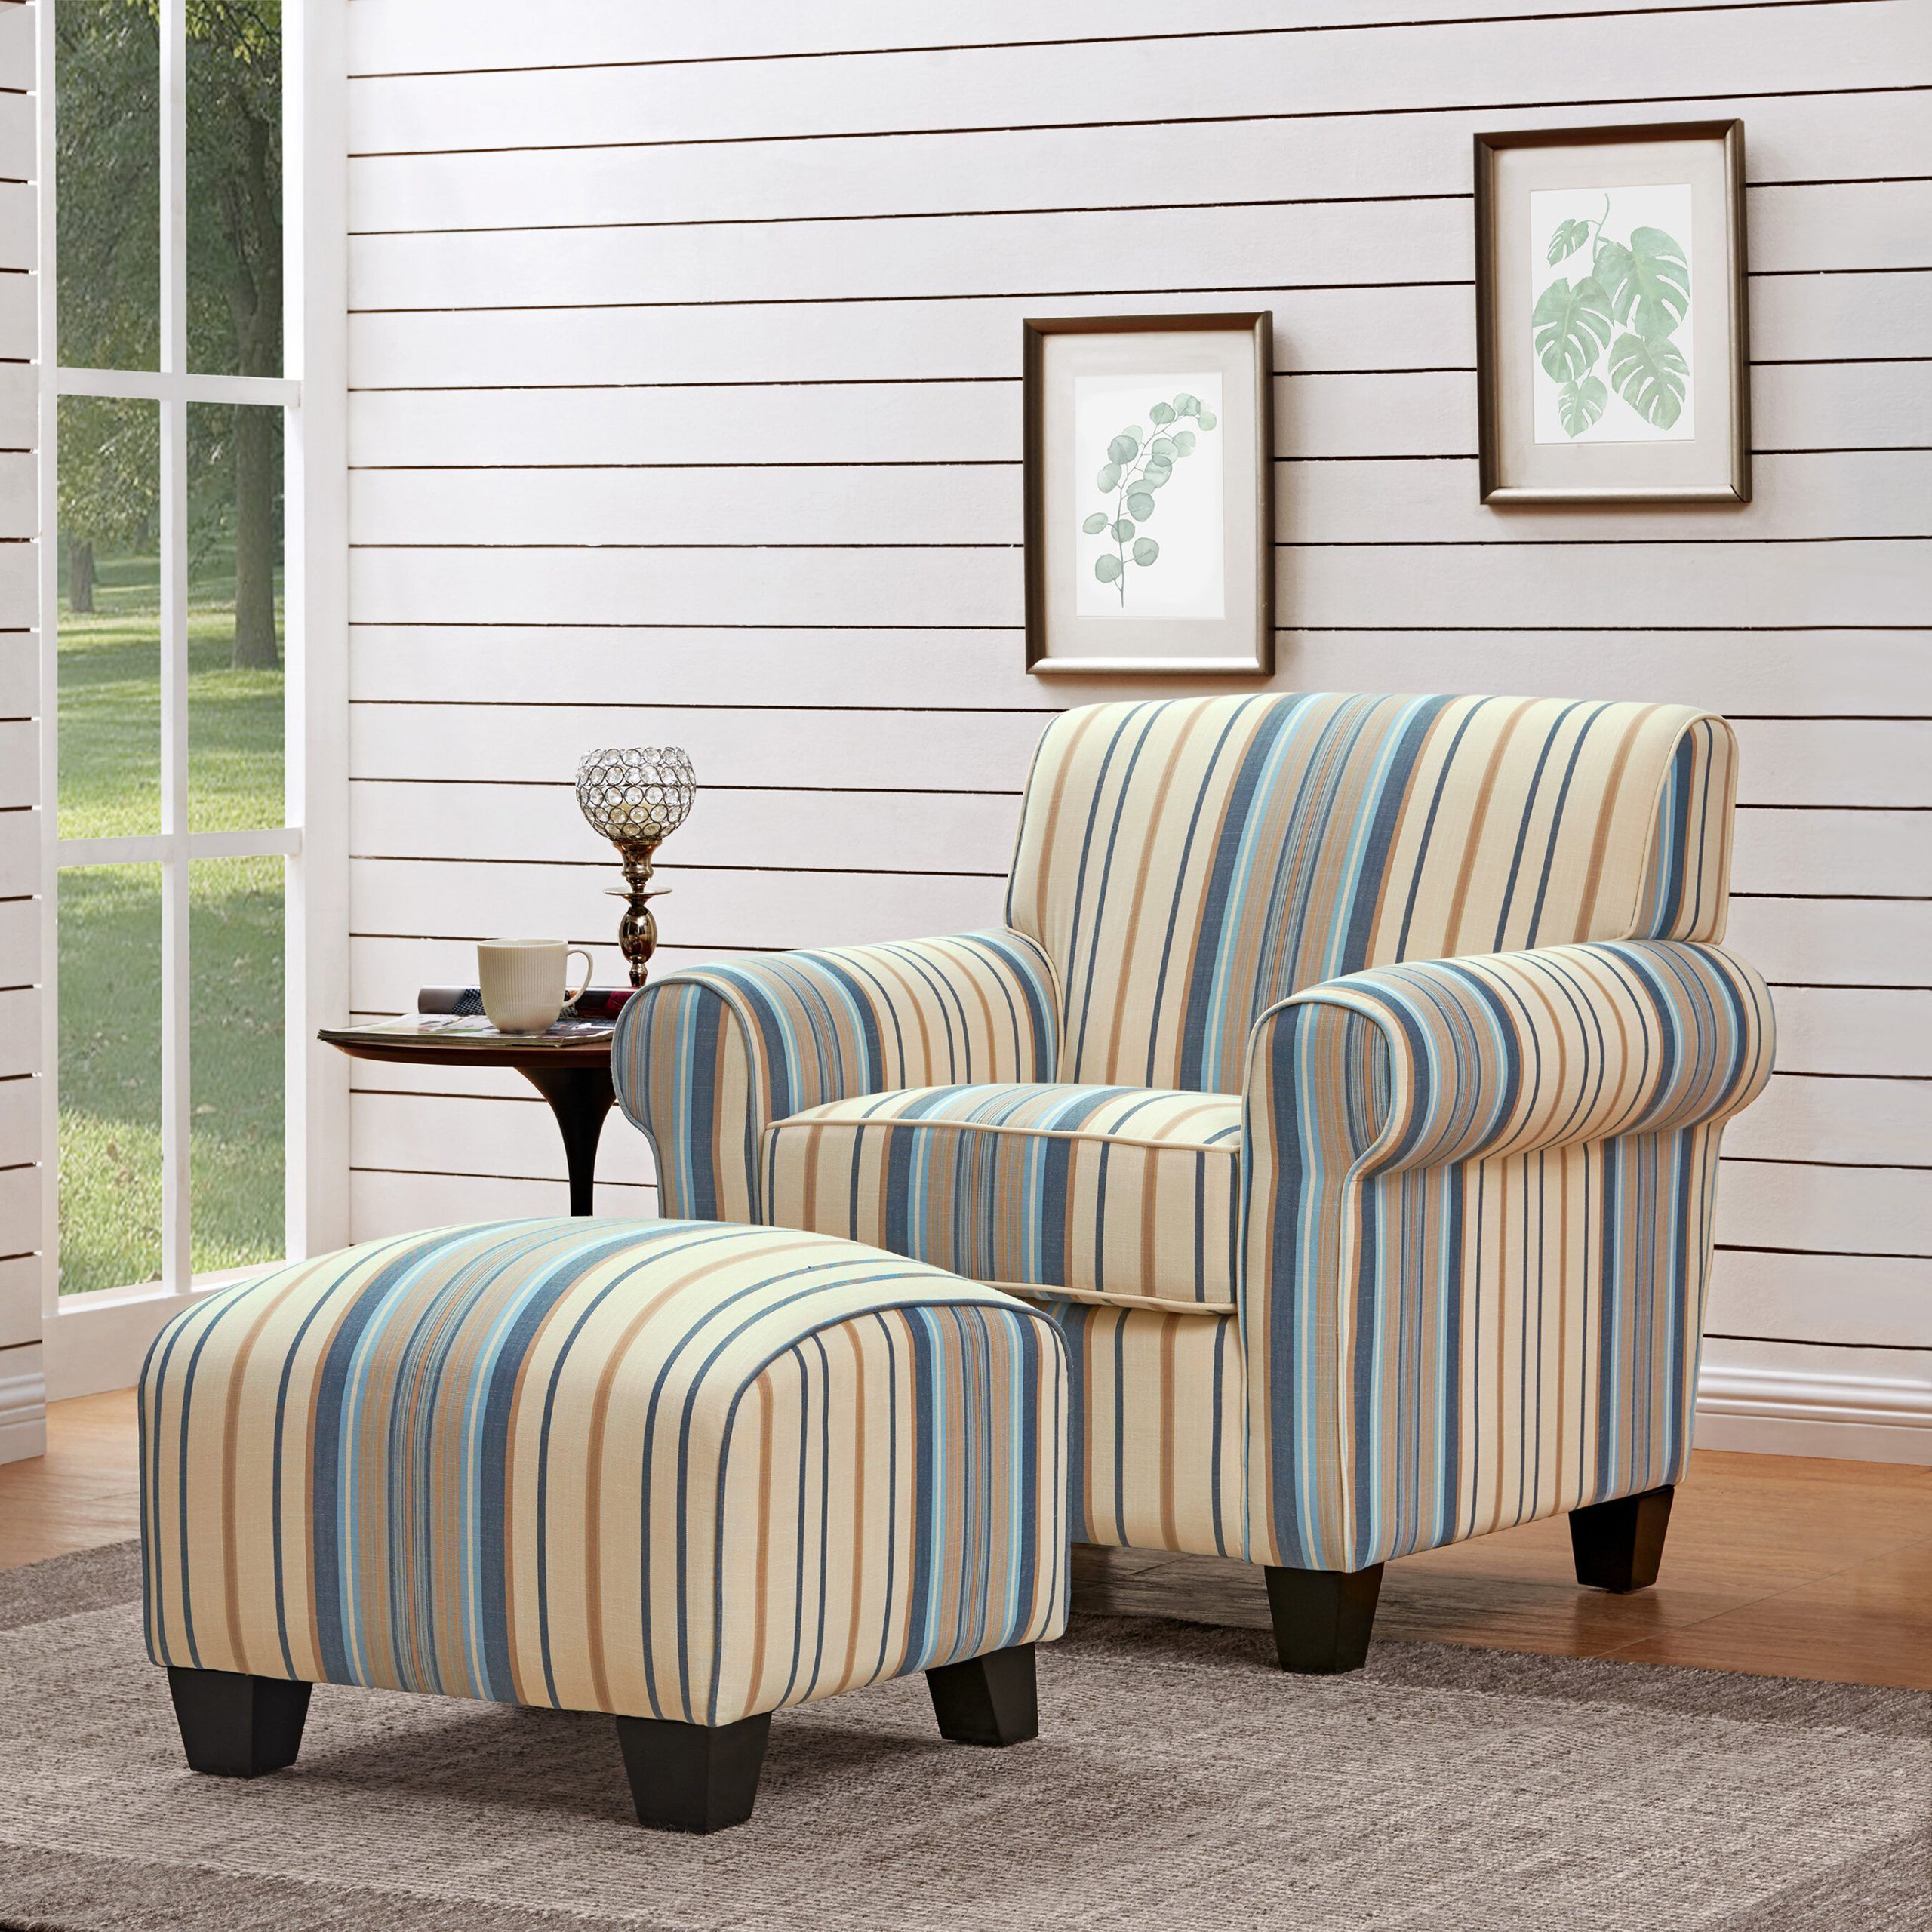 Arm Ottoman Included Accent Chairs You'Ll Love In 2021 | Wayfair Regarding Michalak Cheswood Armchairs And Ottoman (View 3 of 15)